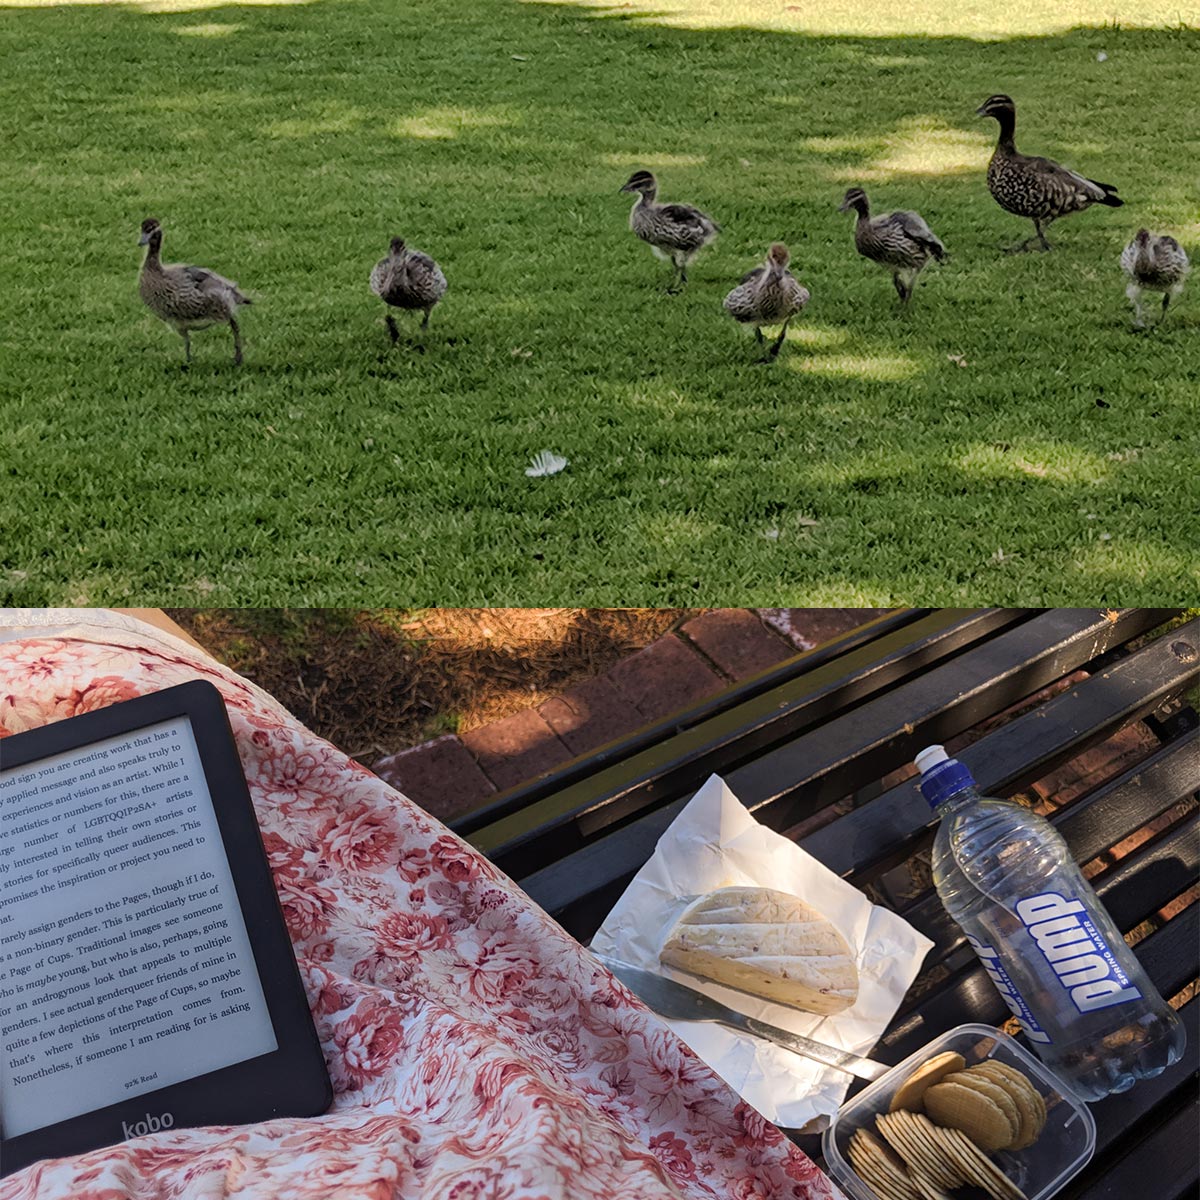 an image of ducks and ducklings, and my Beltane picnic